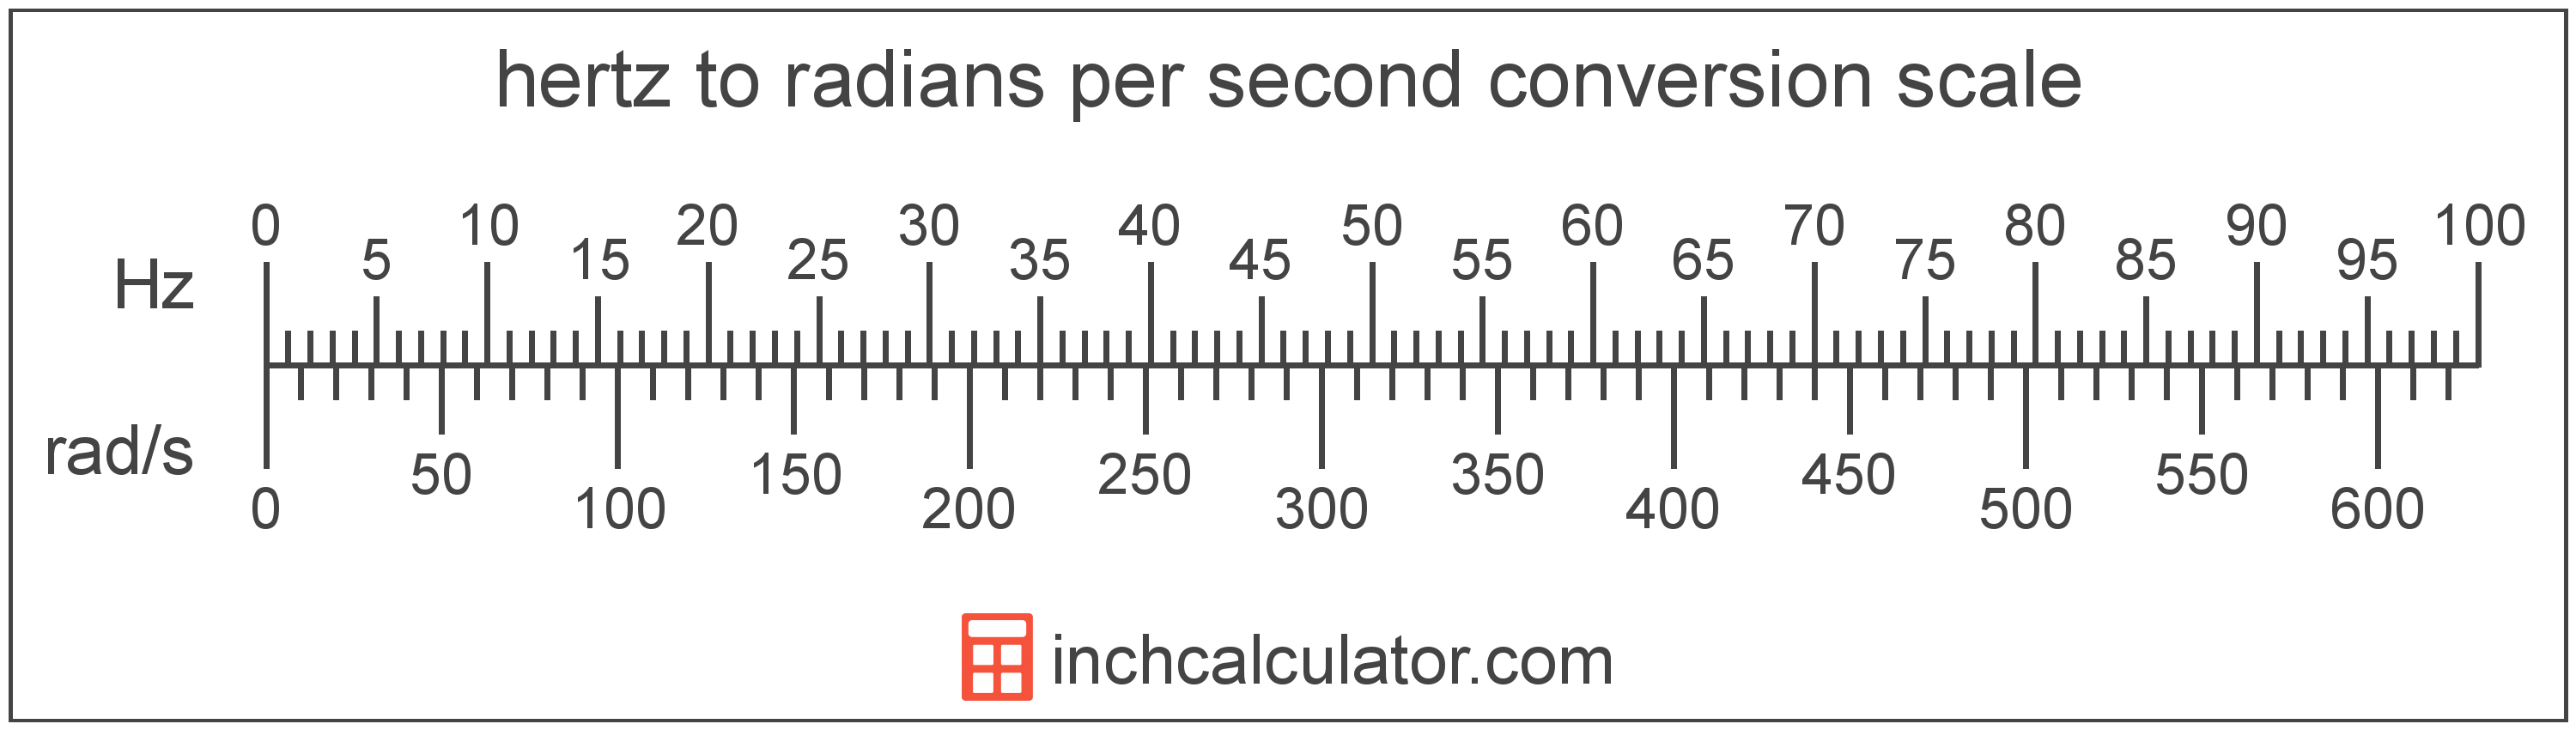 conversion scale showing radians per second and equivalent hertz frequency values